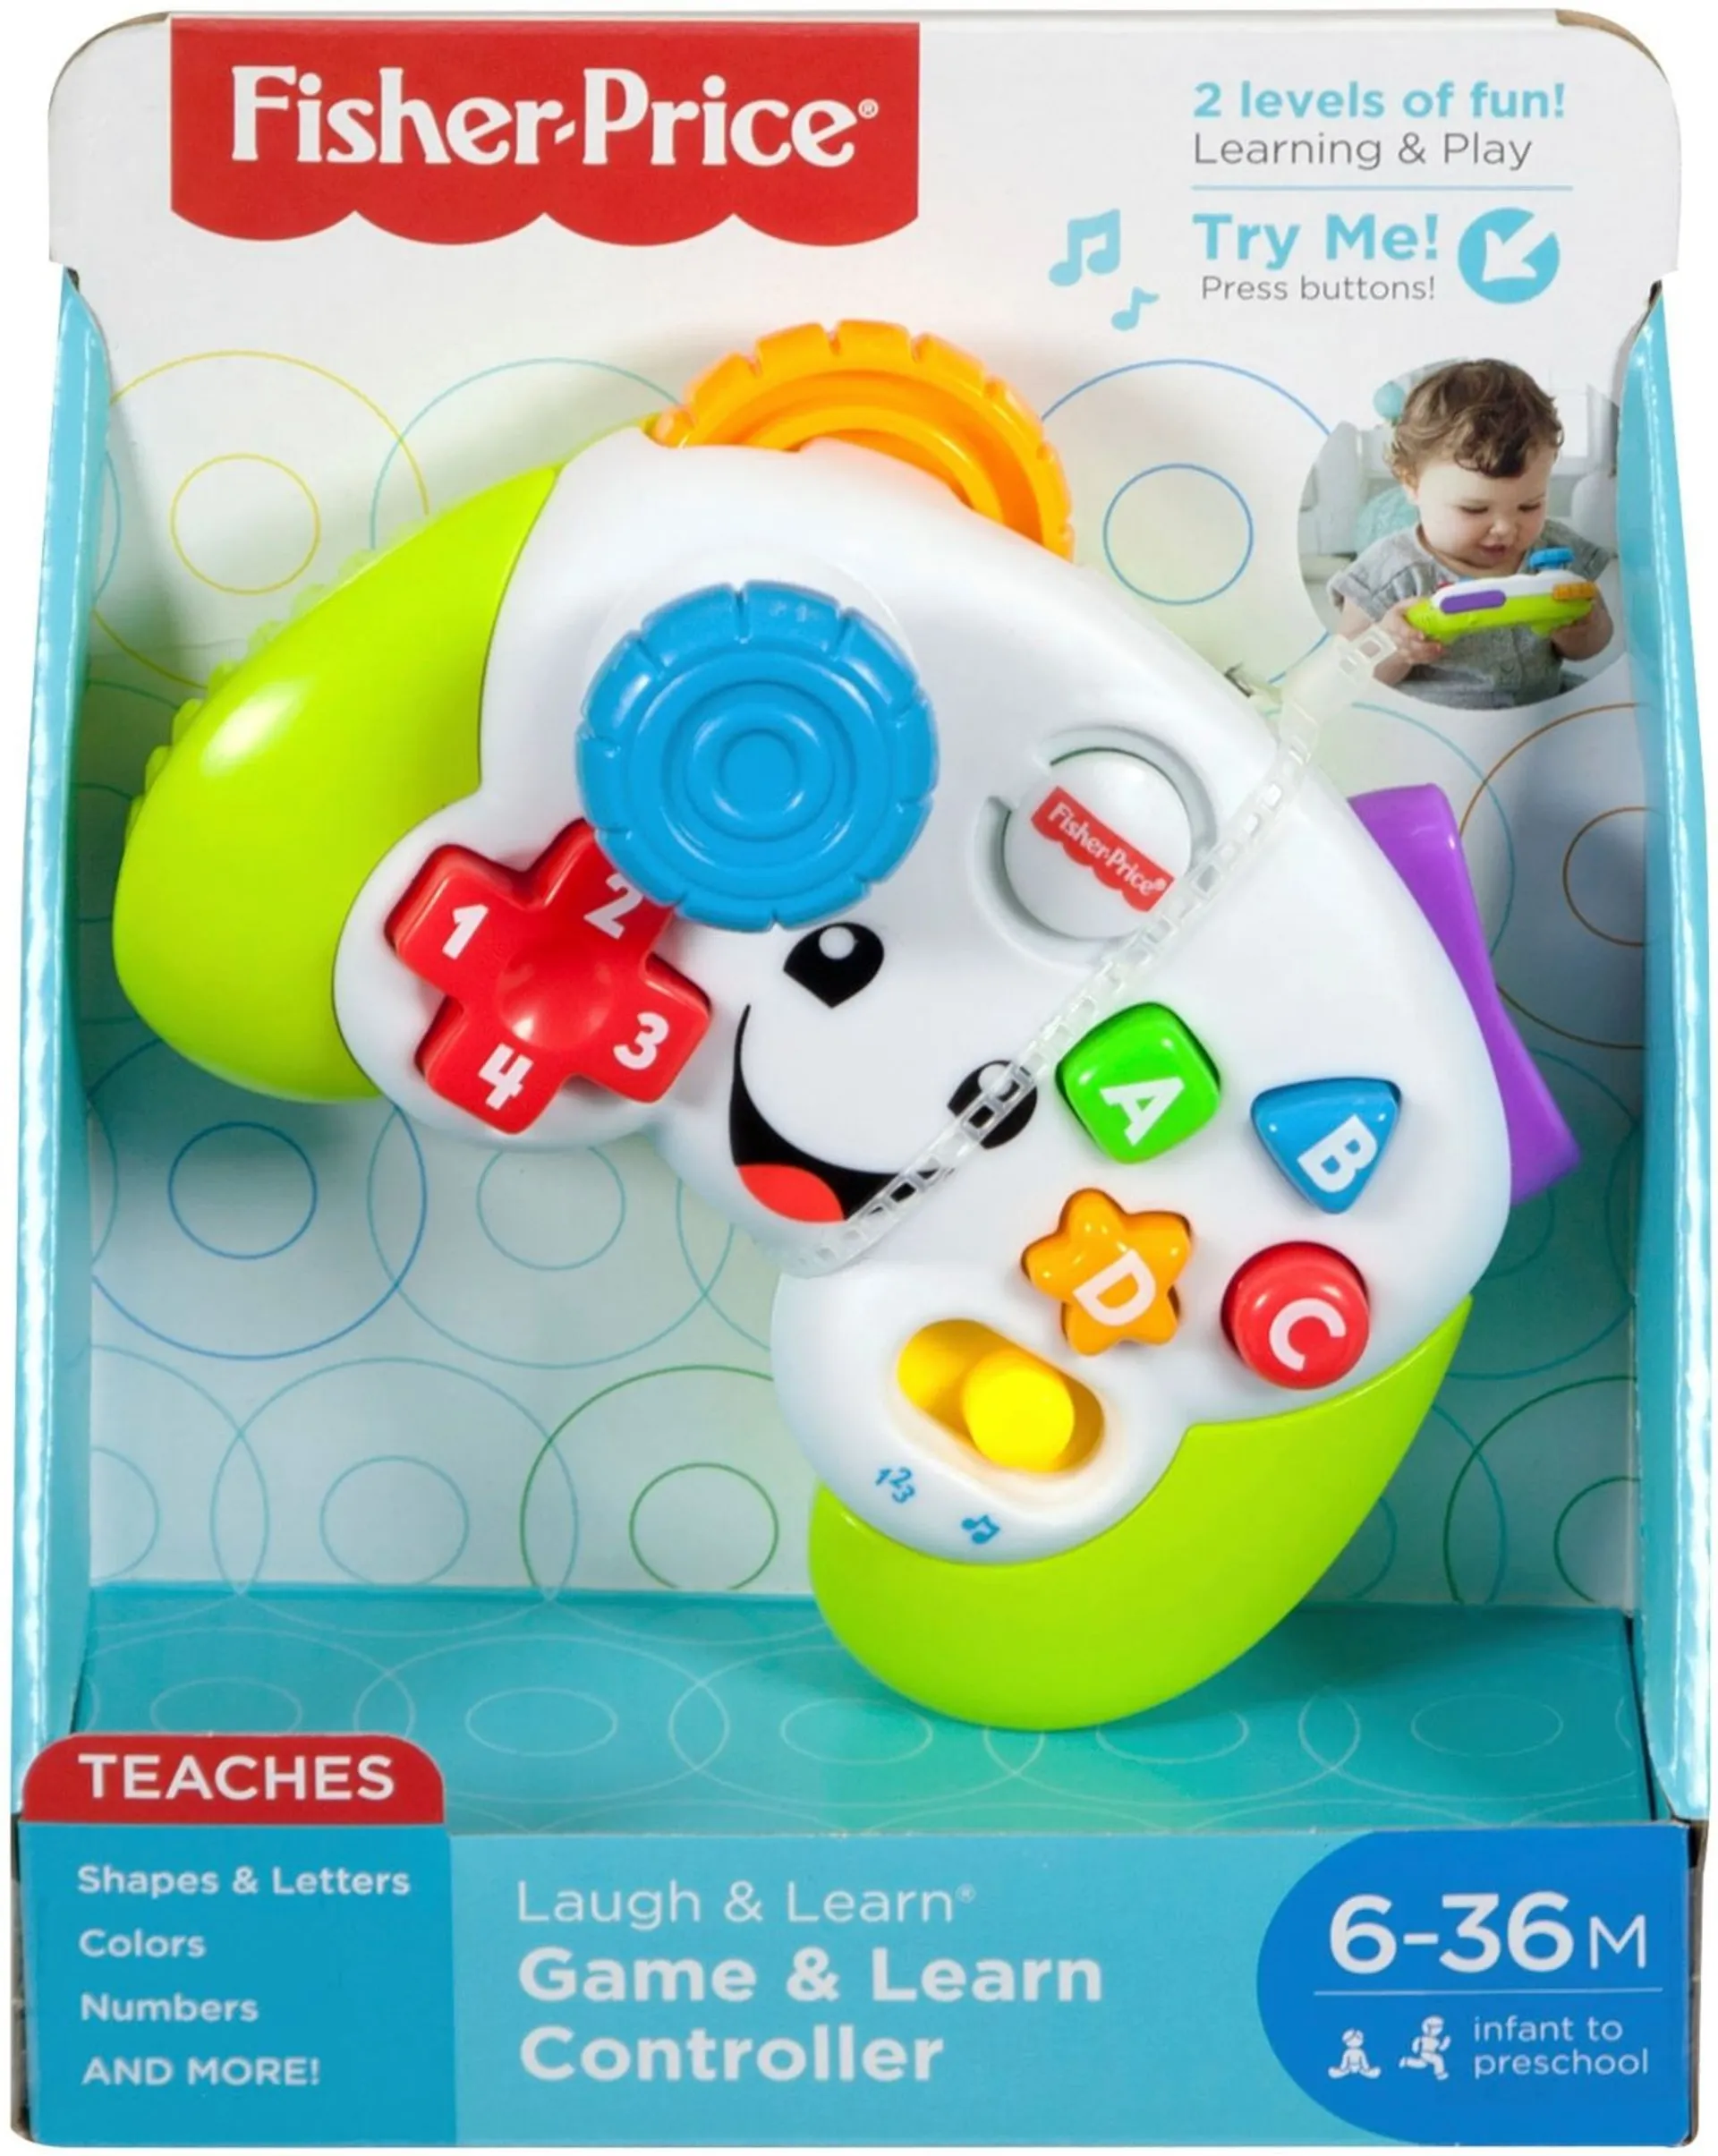 Fisher-Price Smart stages Game & Learn controller grh32 - 1